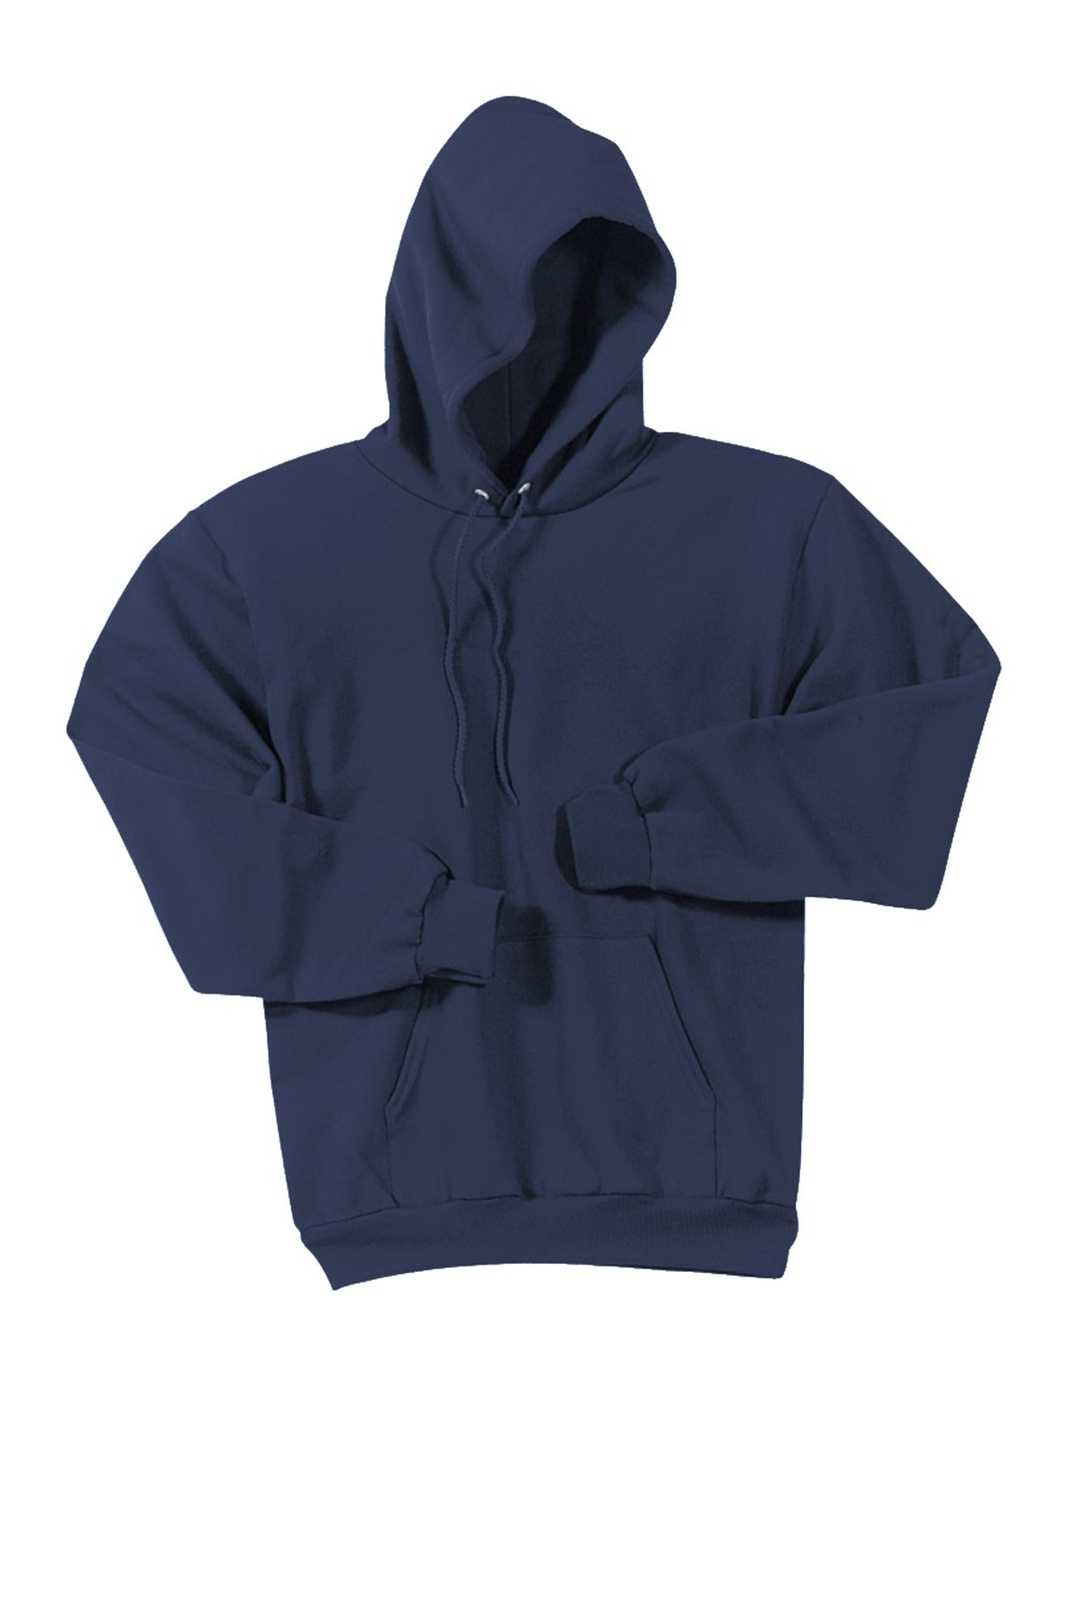 Port & Company PC90HT Tall Essential Fleece Pullover Hooded Sweatshirt - Navy - HIT a Double - 1